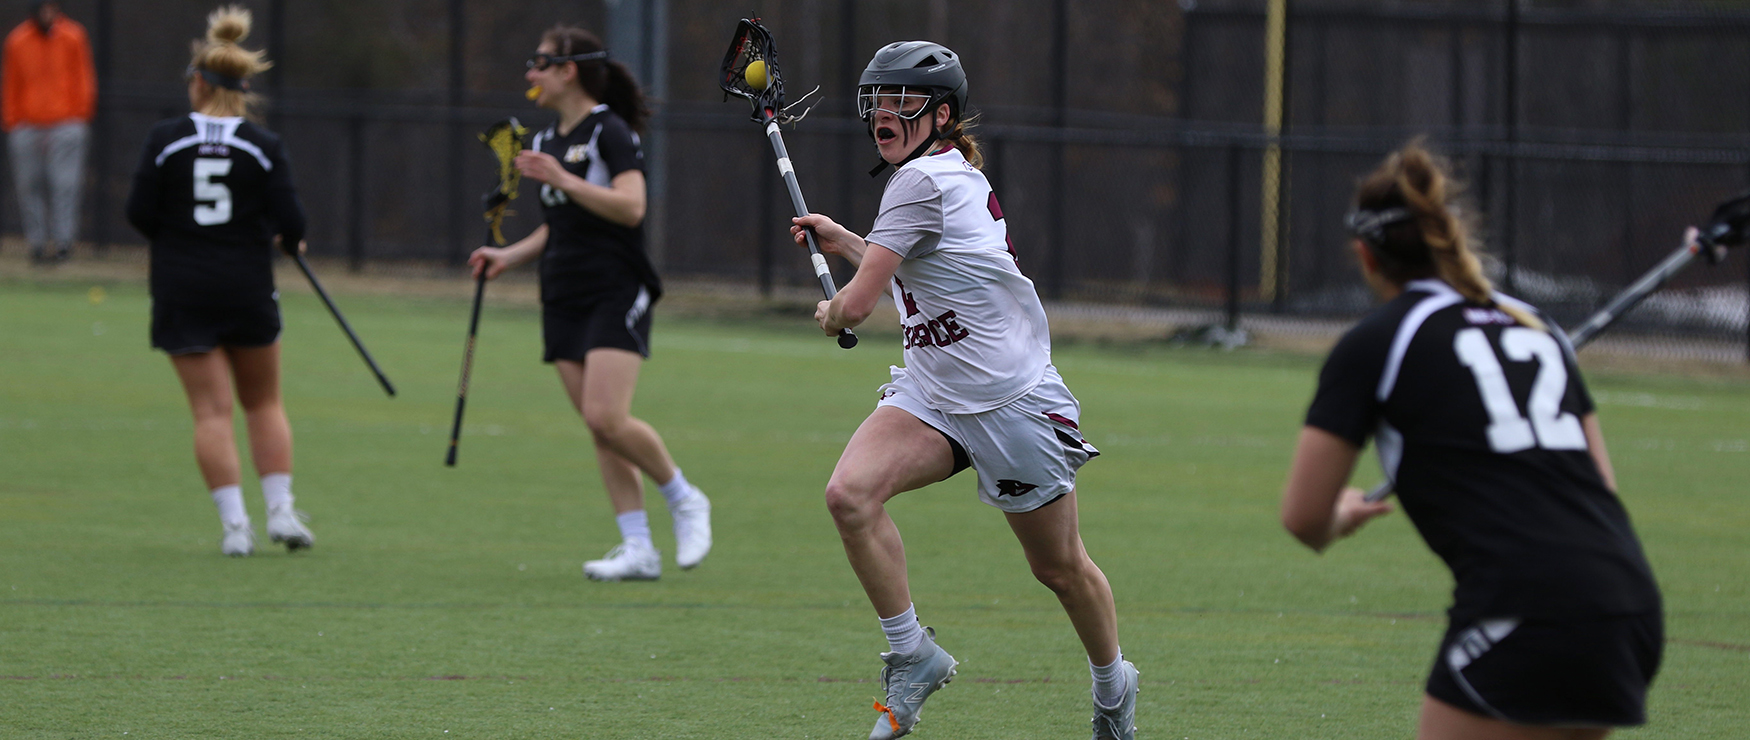 First Half Sinks Women’s Lacrosse in 26-16 Loss at No. 14 Pace